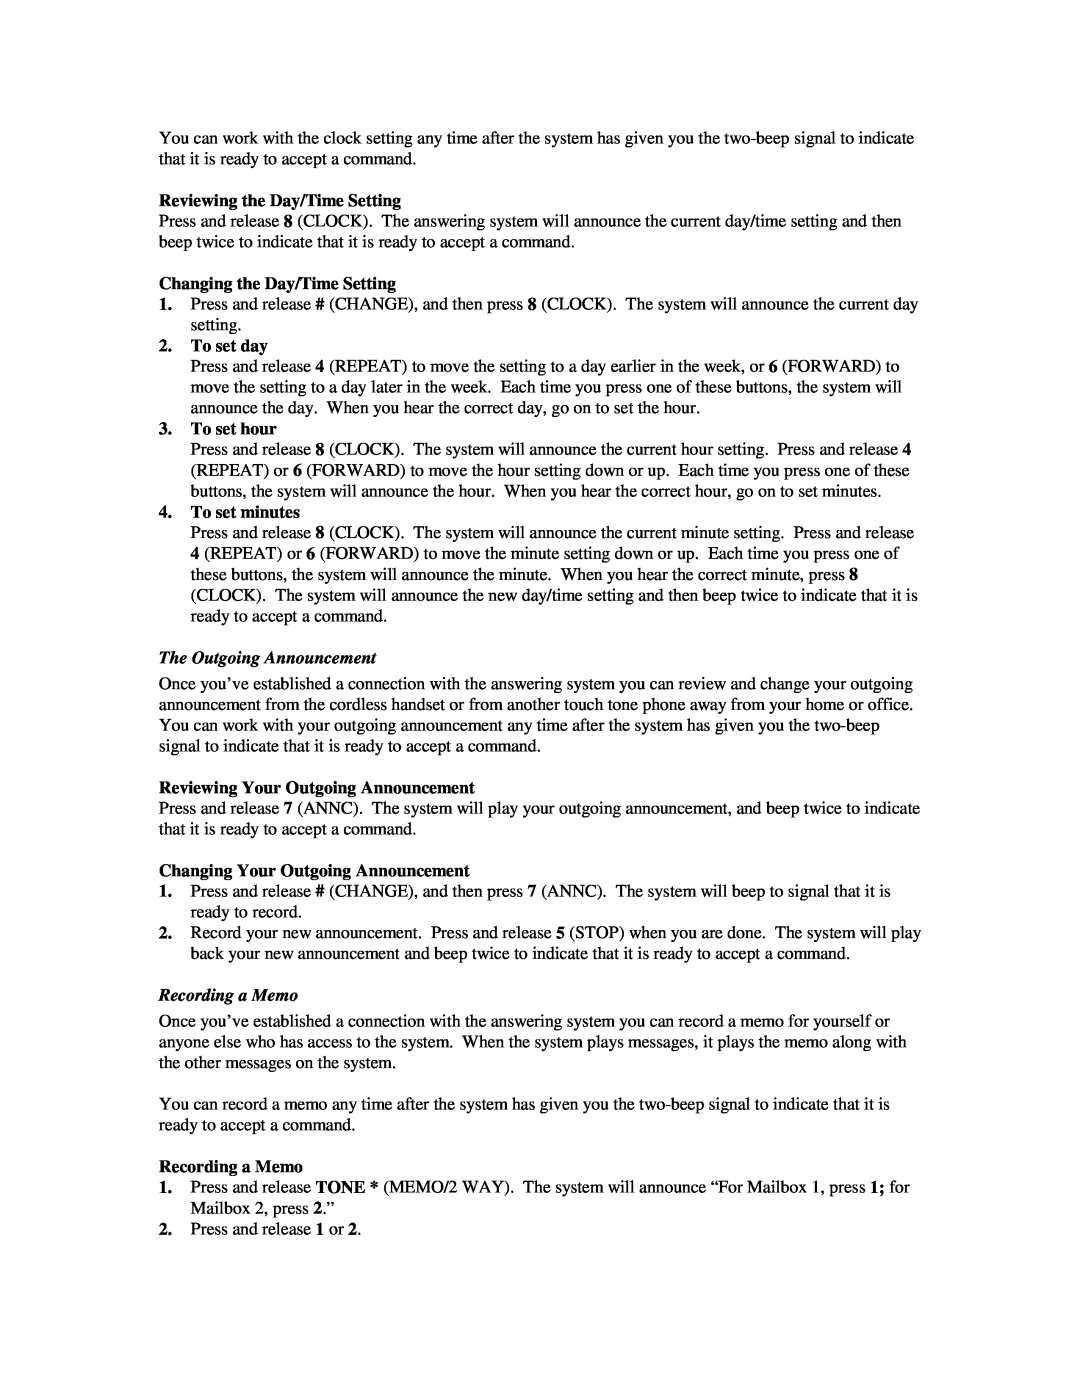 AT&T 5635 manual Reviewing the Day/Time Setting, Changing the Day/Time Setting, To set day, To set hour, To set minutes 